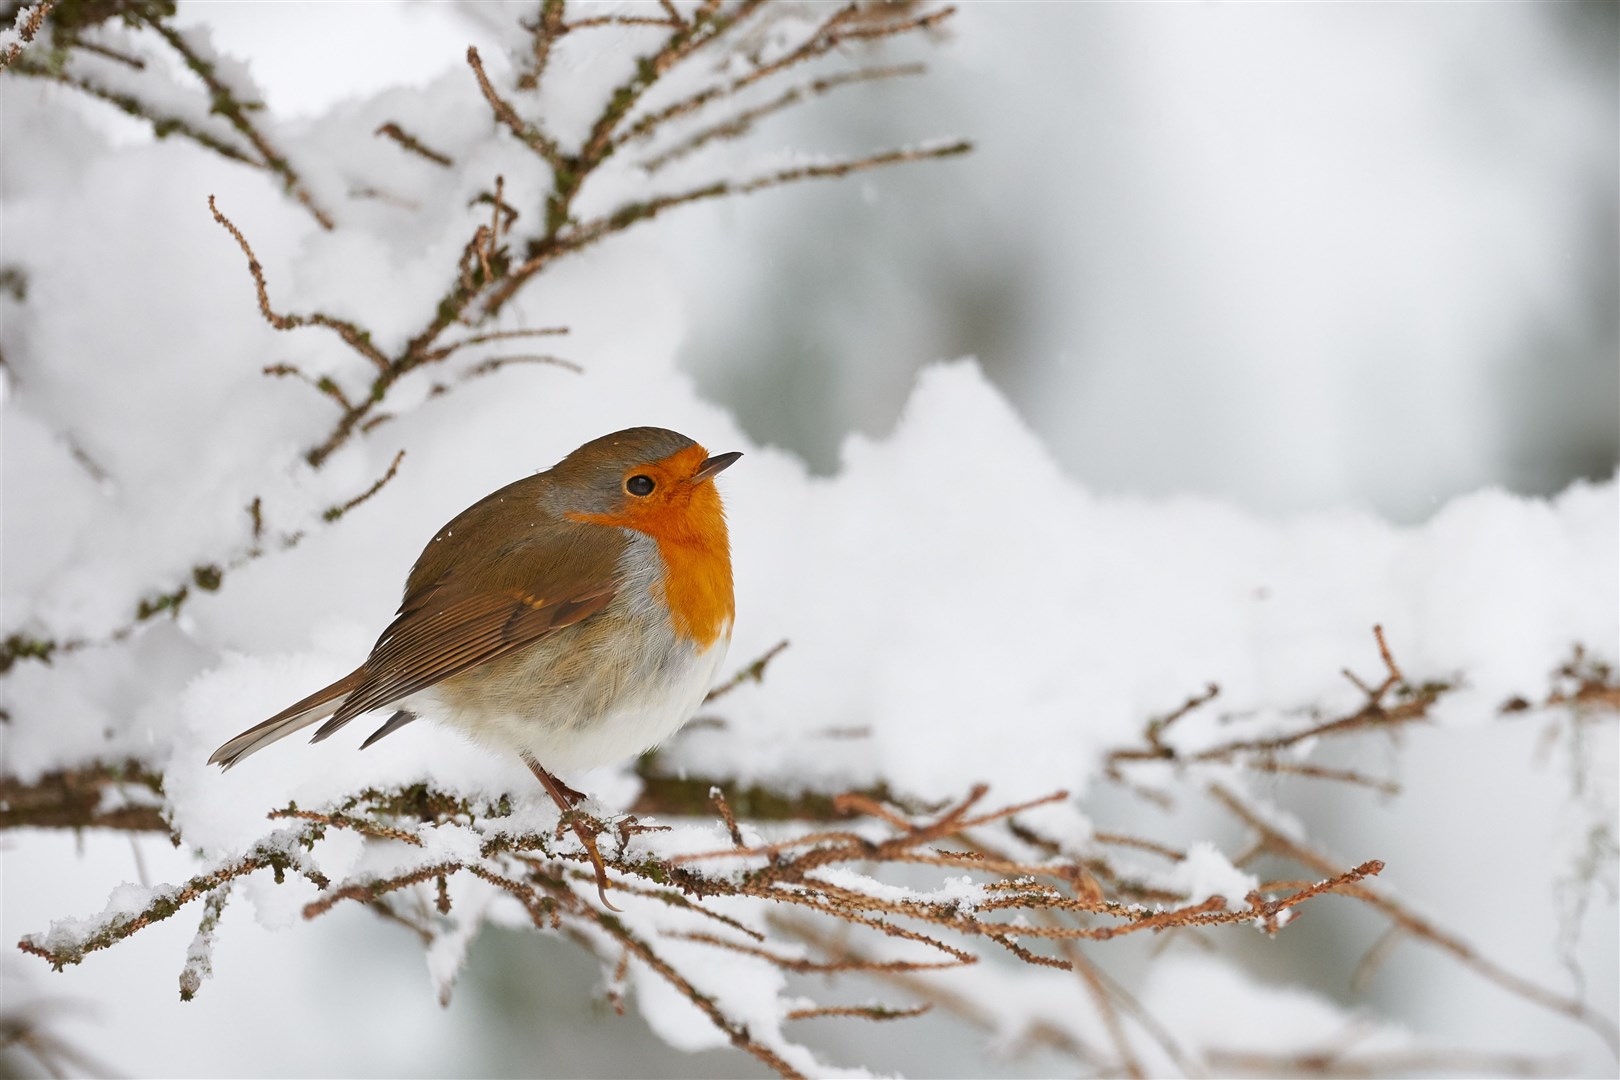 Robin shivering in the snow, perched on a small branch.